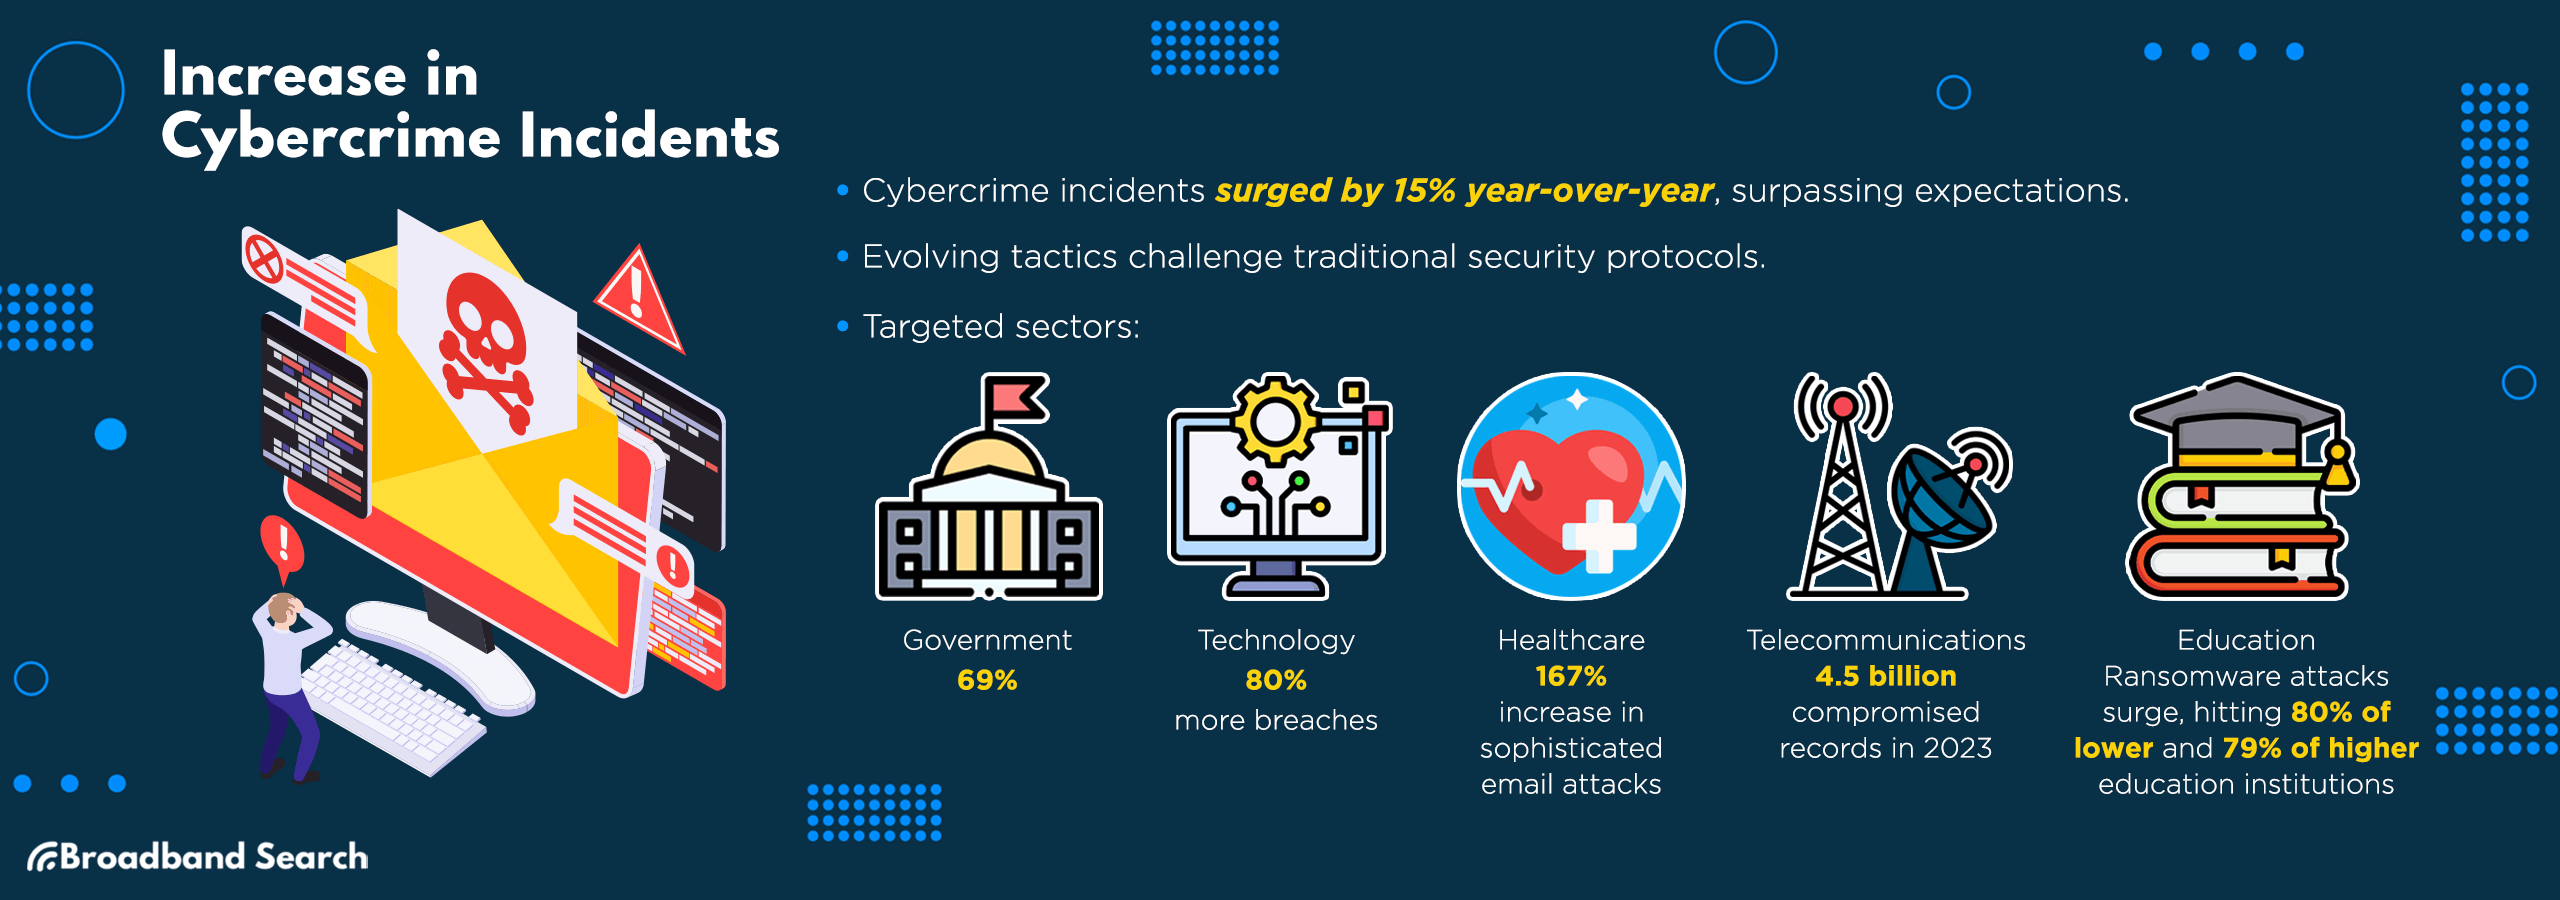 data on increase in cybercrime incidents